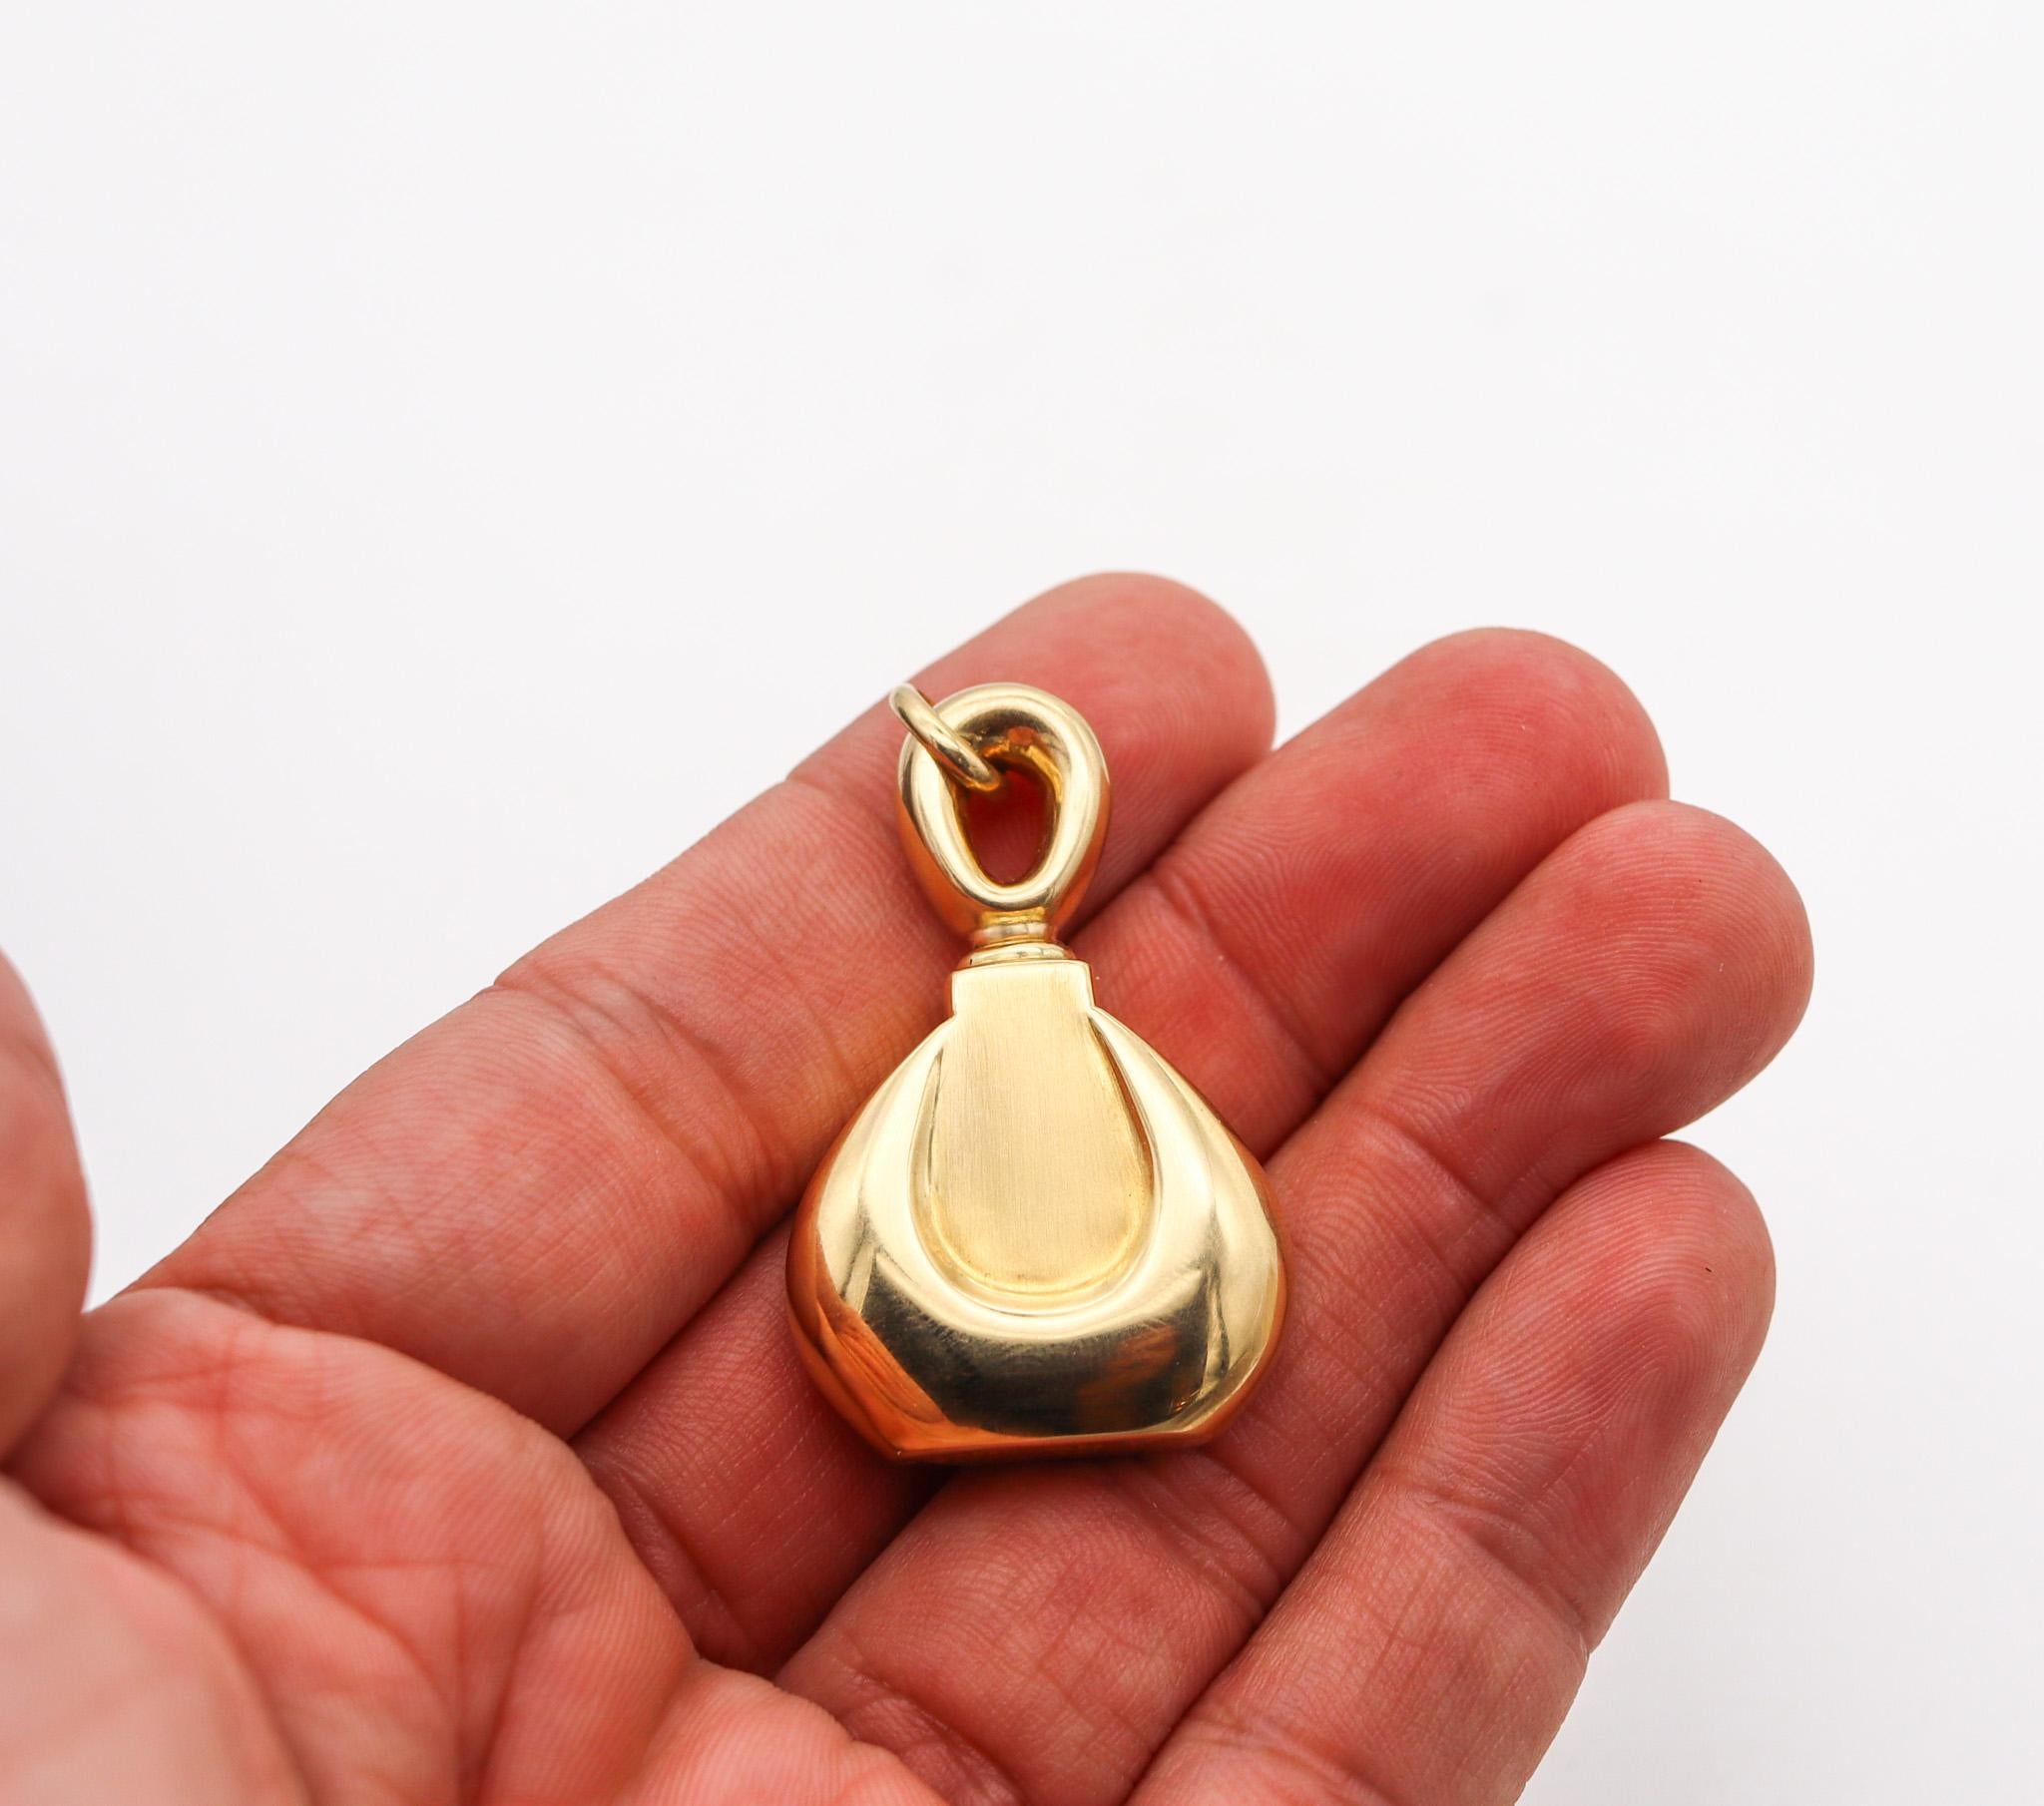 Van Cleef & Arpels 1976 Paris Pendant Perfume Bottle In Solid 18Kt Yellow Gold In Excellent Condition For Sale In Miami, FL